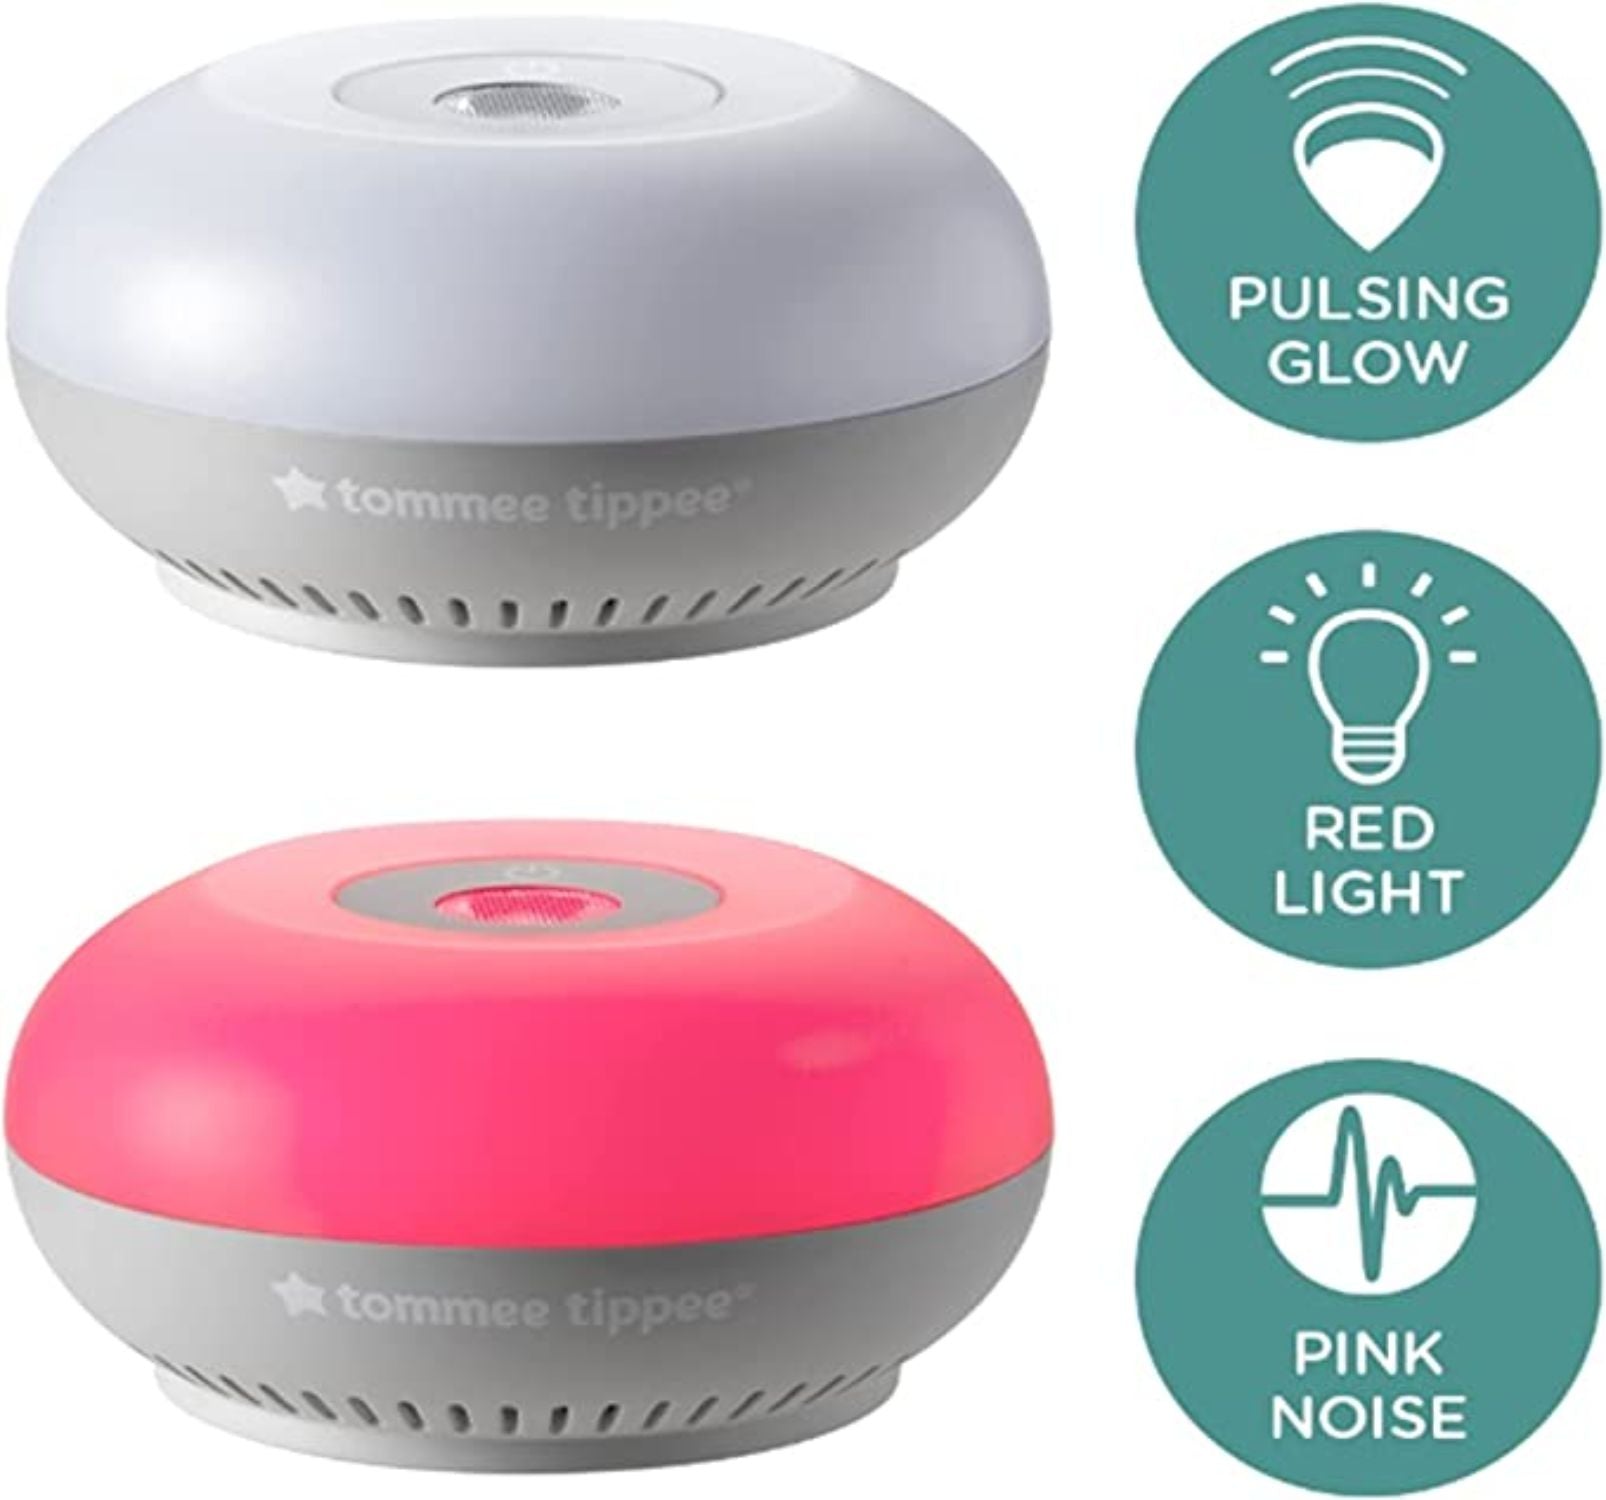 Tommee Tippee Dreammaker Baby Sleep Aid, Pink Noise, Red Light Night Light, Scientifically Proven, Intelligent CrySensor